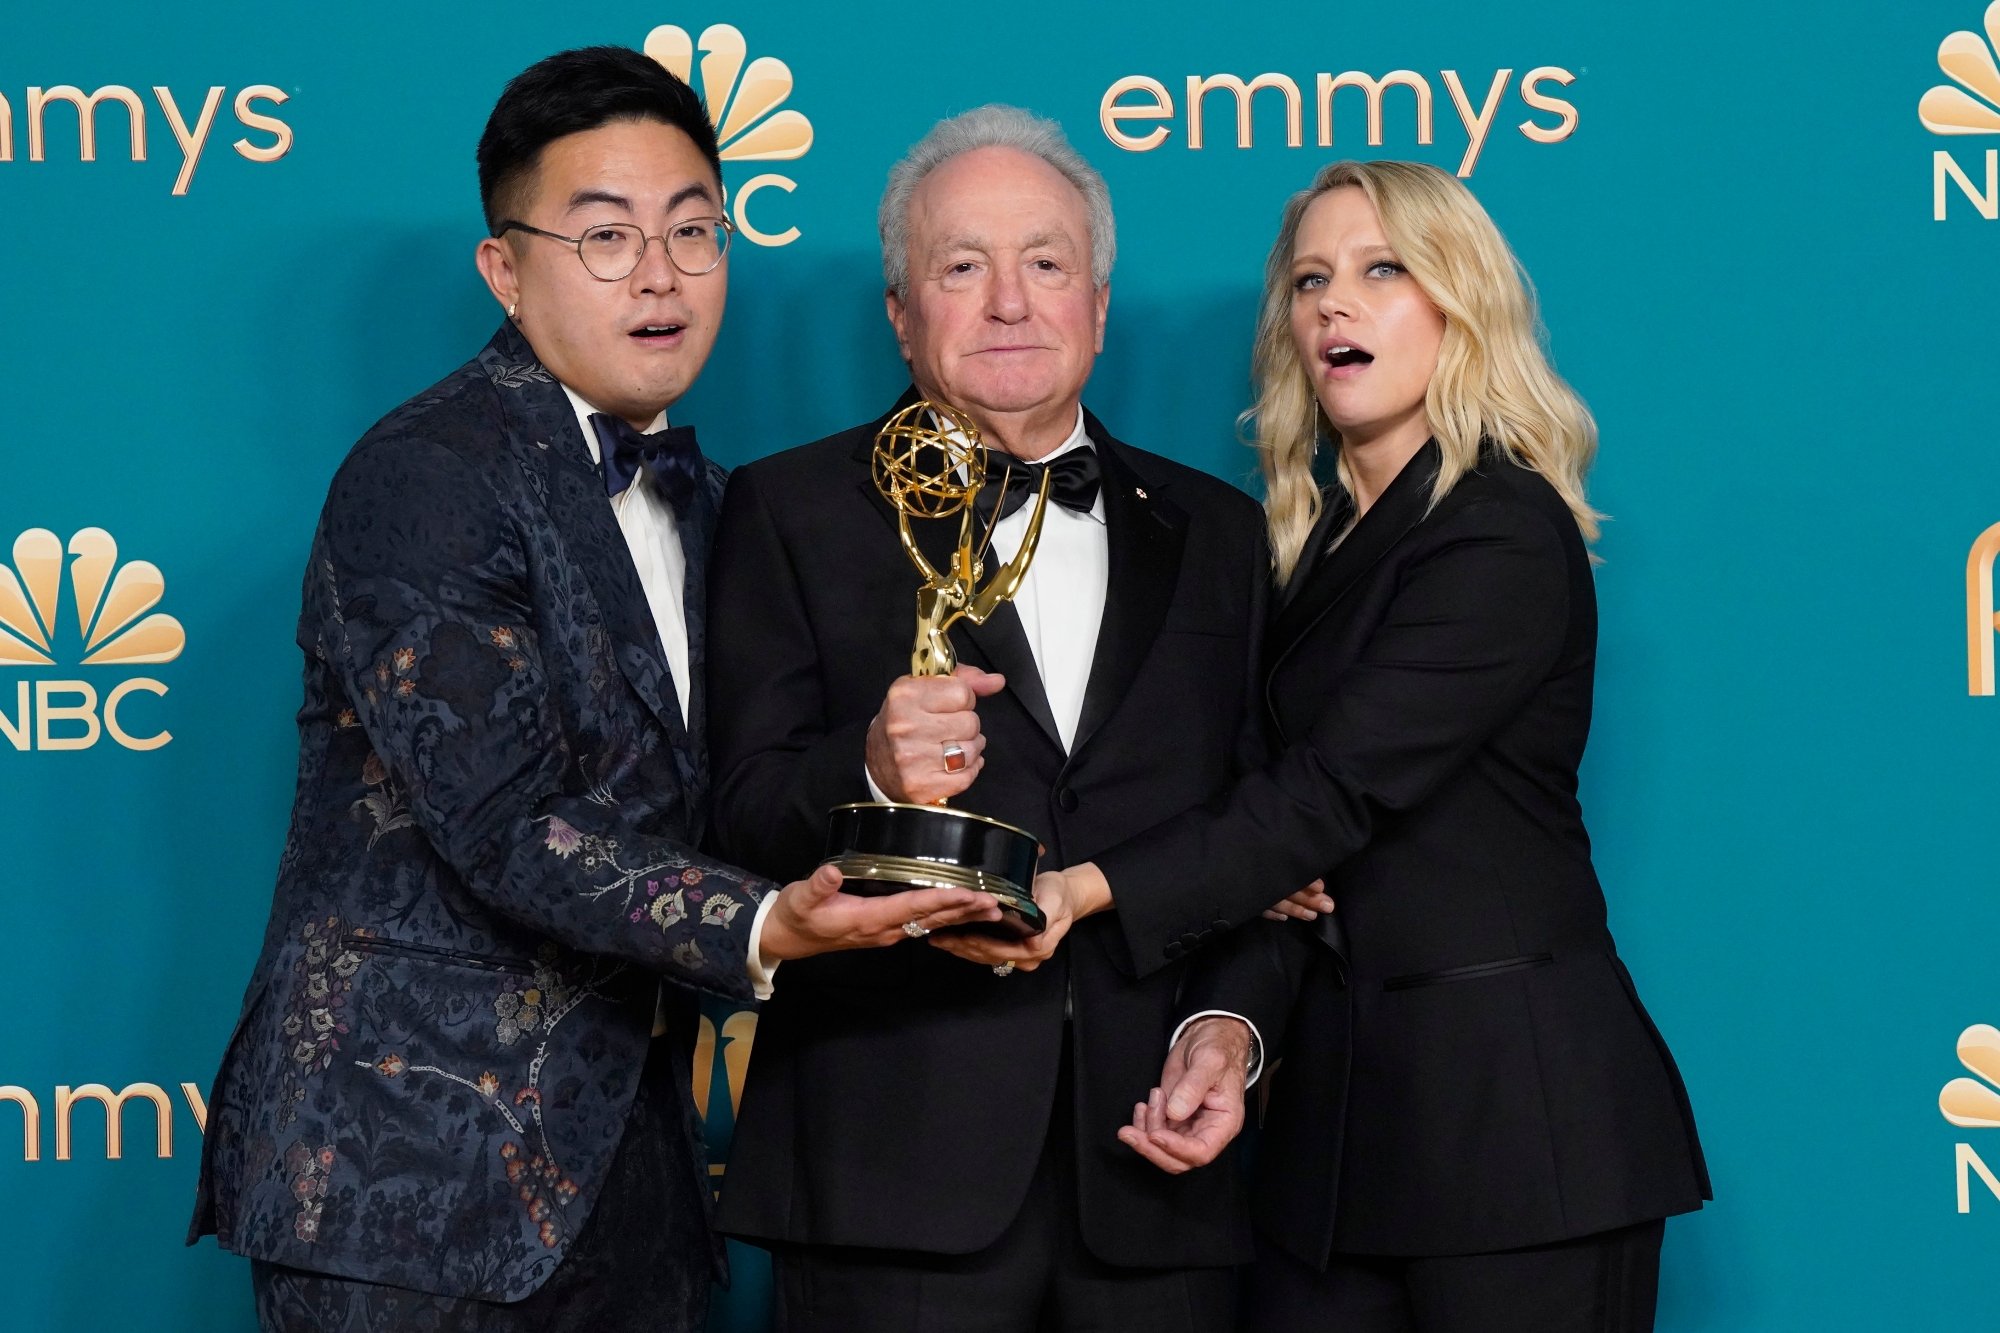 'Saturday Night Live' Bowen Yang, Lorne Michaels, and Kate McKinnon standing in front of Emmys step and repeat. They're all holding an Emmy award with their mouths slightly open in excitement.